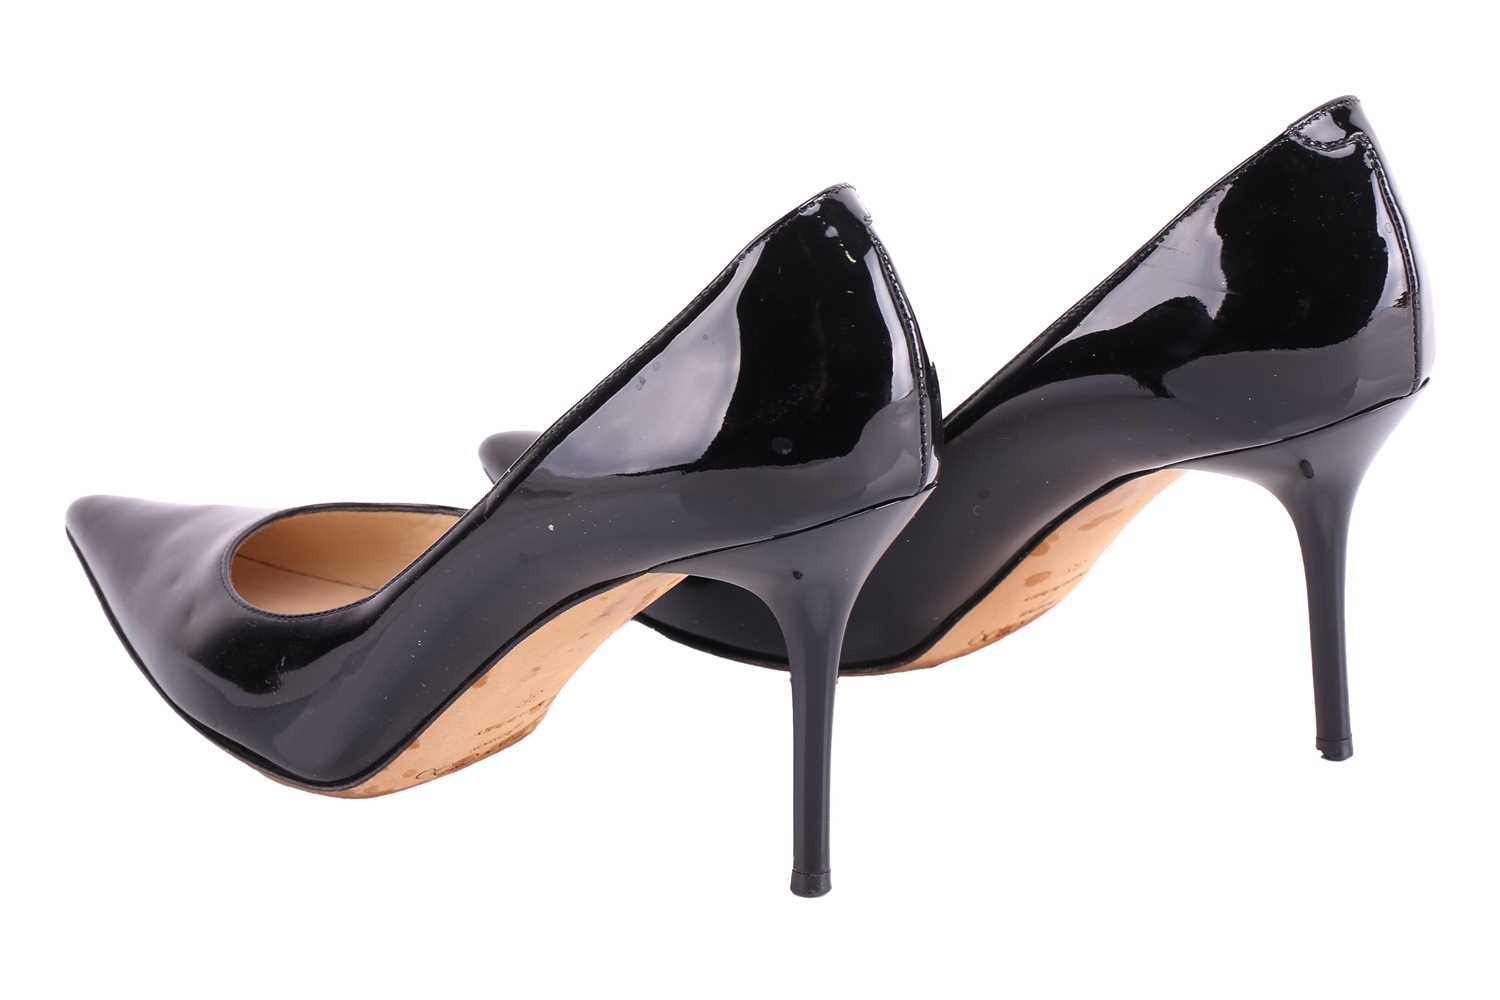 Two pairs of Jimmy Choo heels; including a pair of 'Lancer' pumps in dusty pink suede leather, featu - Image 17 of 20